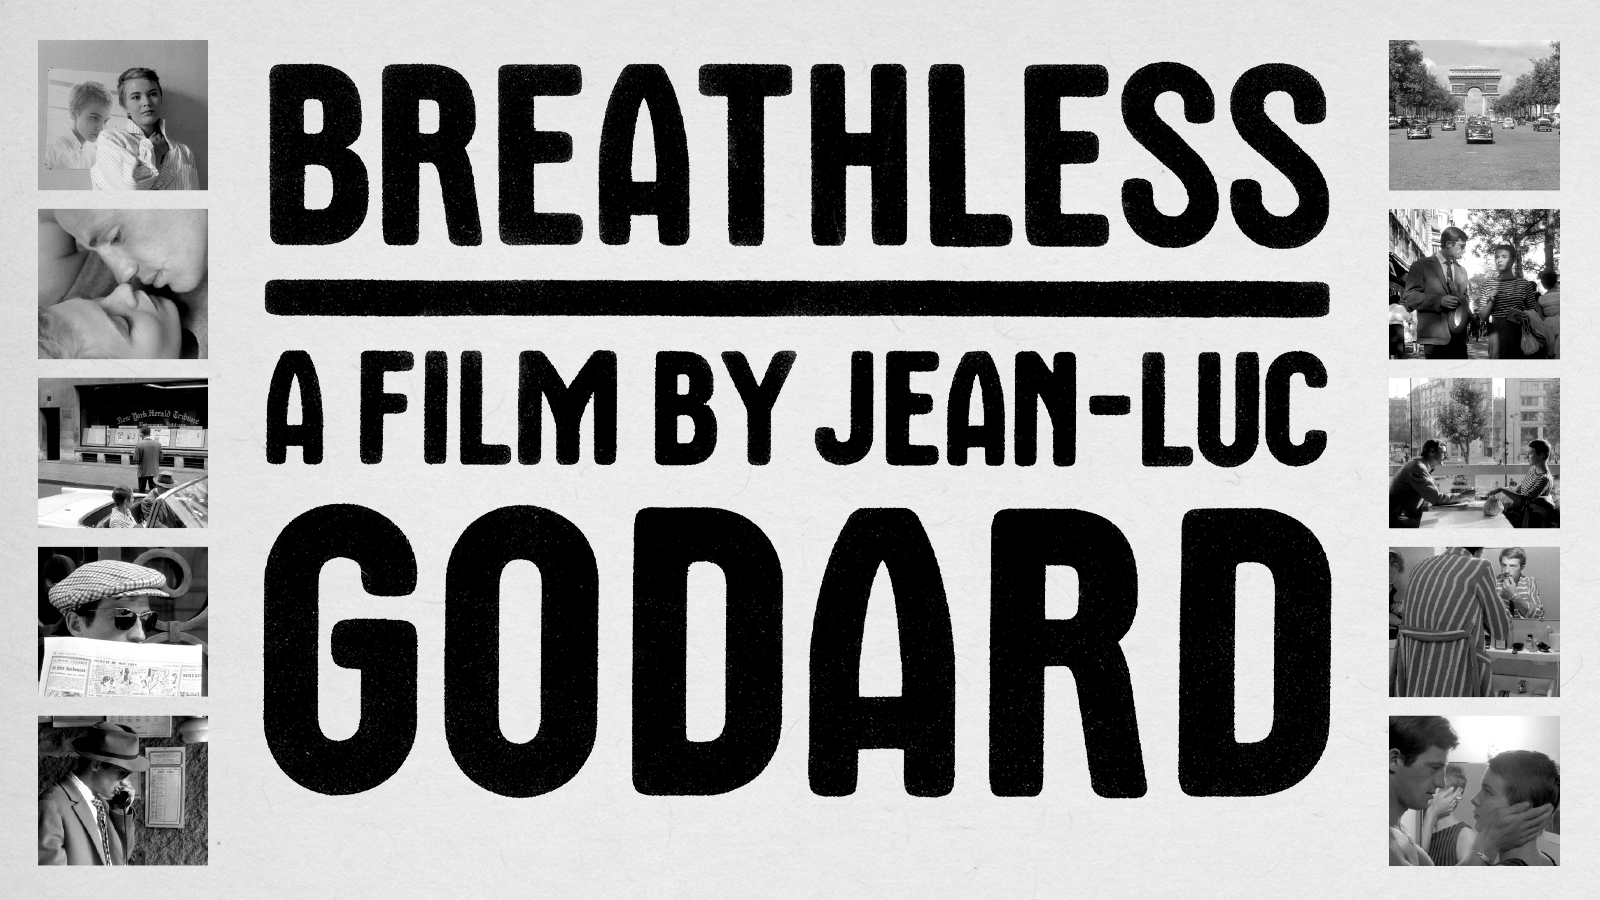 Breathless - The Criterion Channel